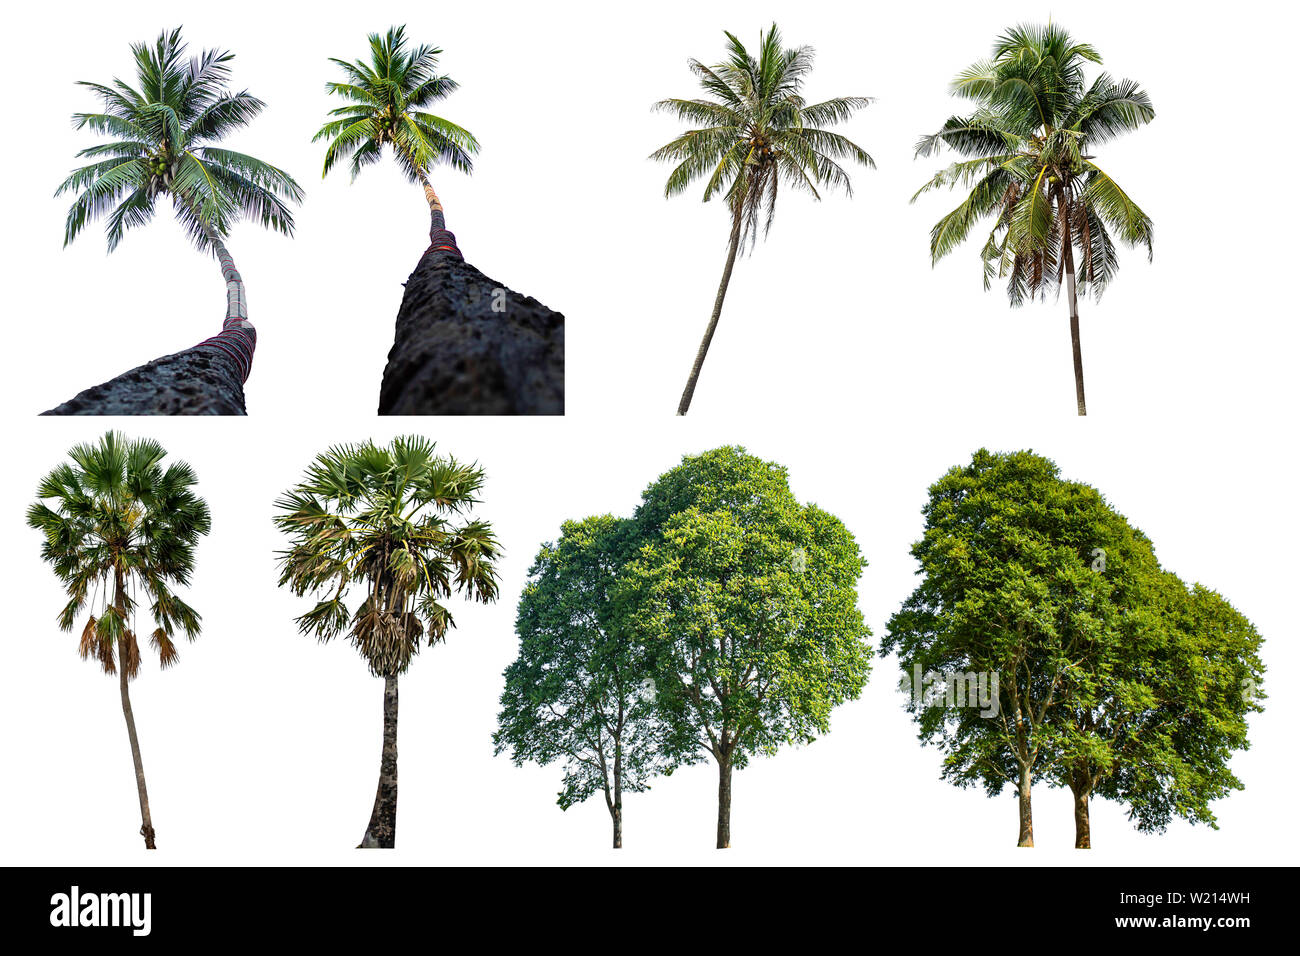 Isolated coconut trees and Palm trees on a white background with clipping path. Stock Photo